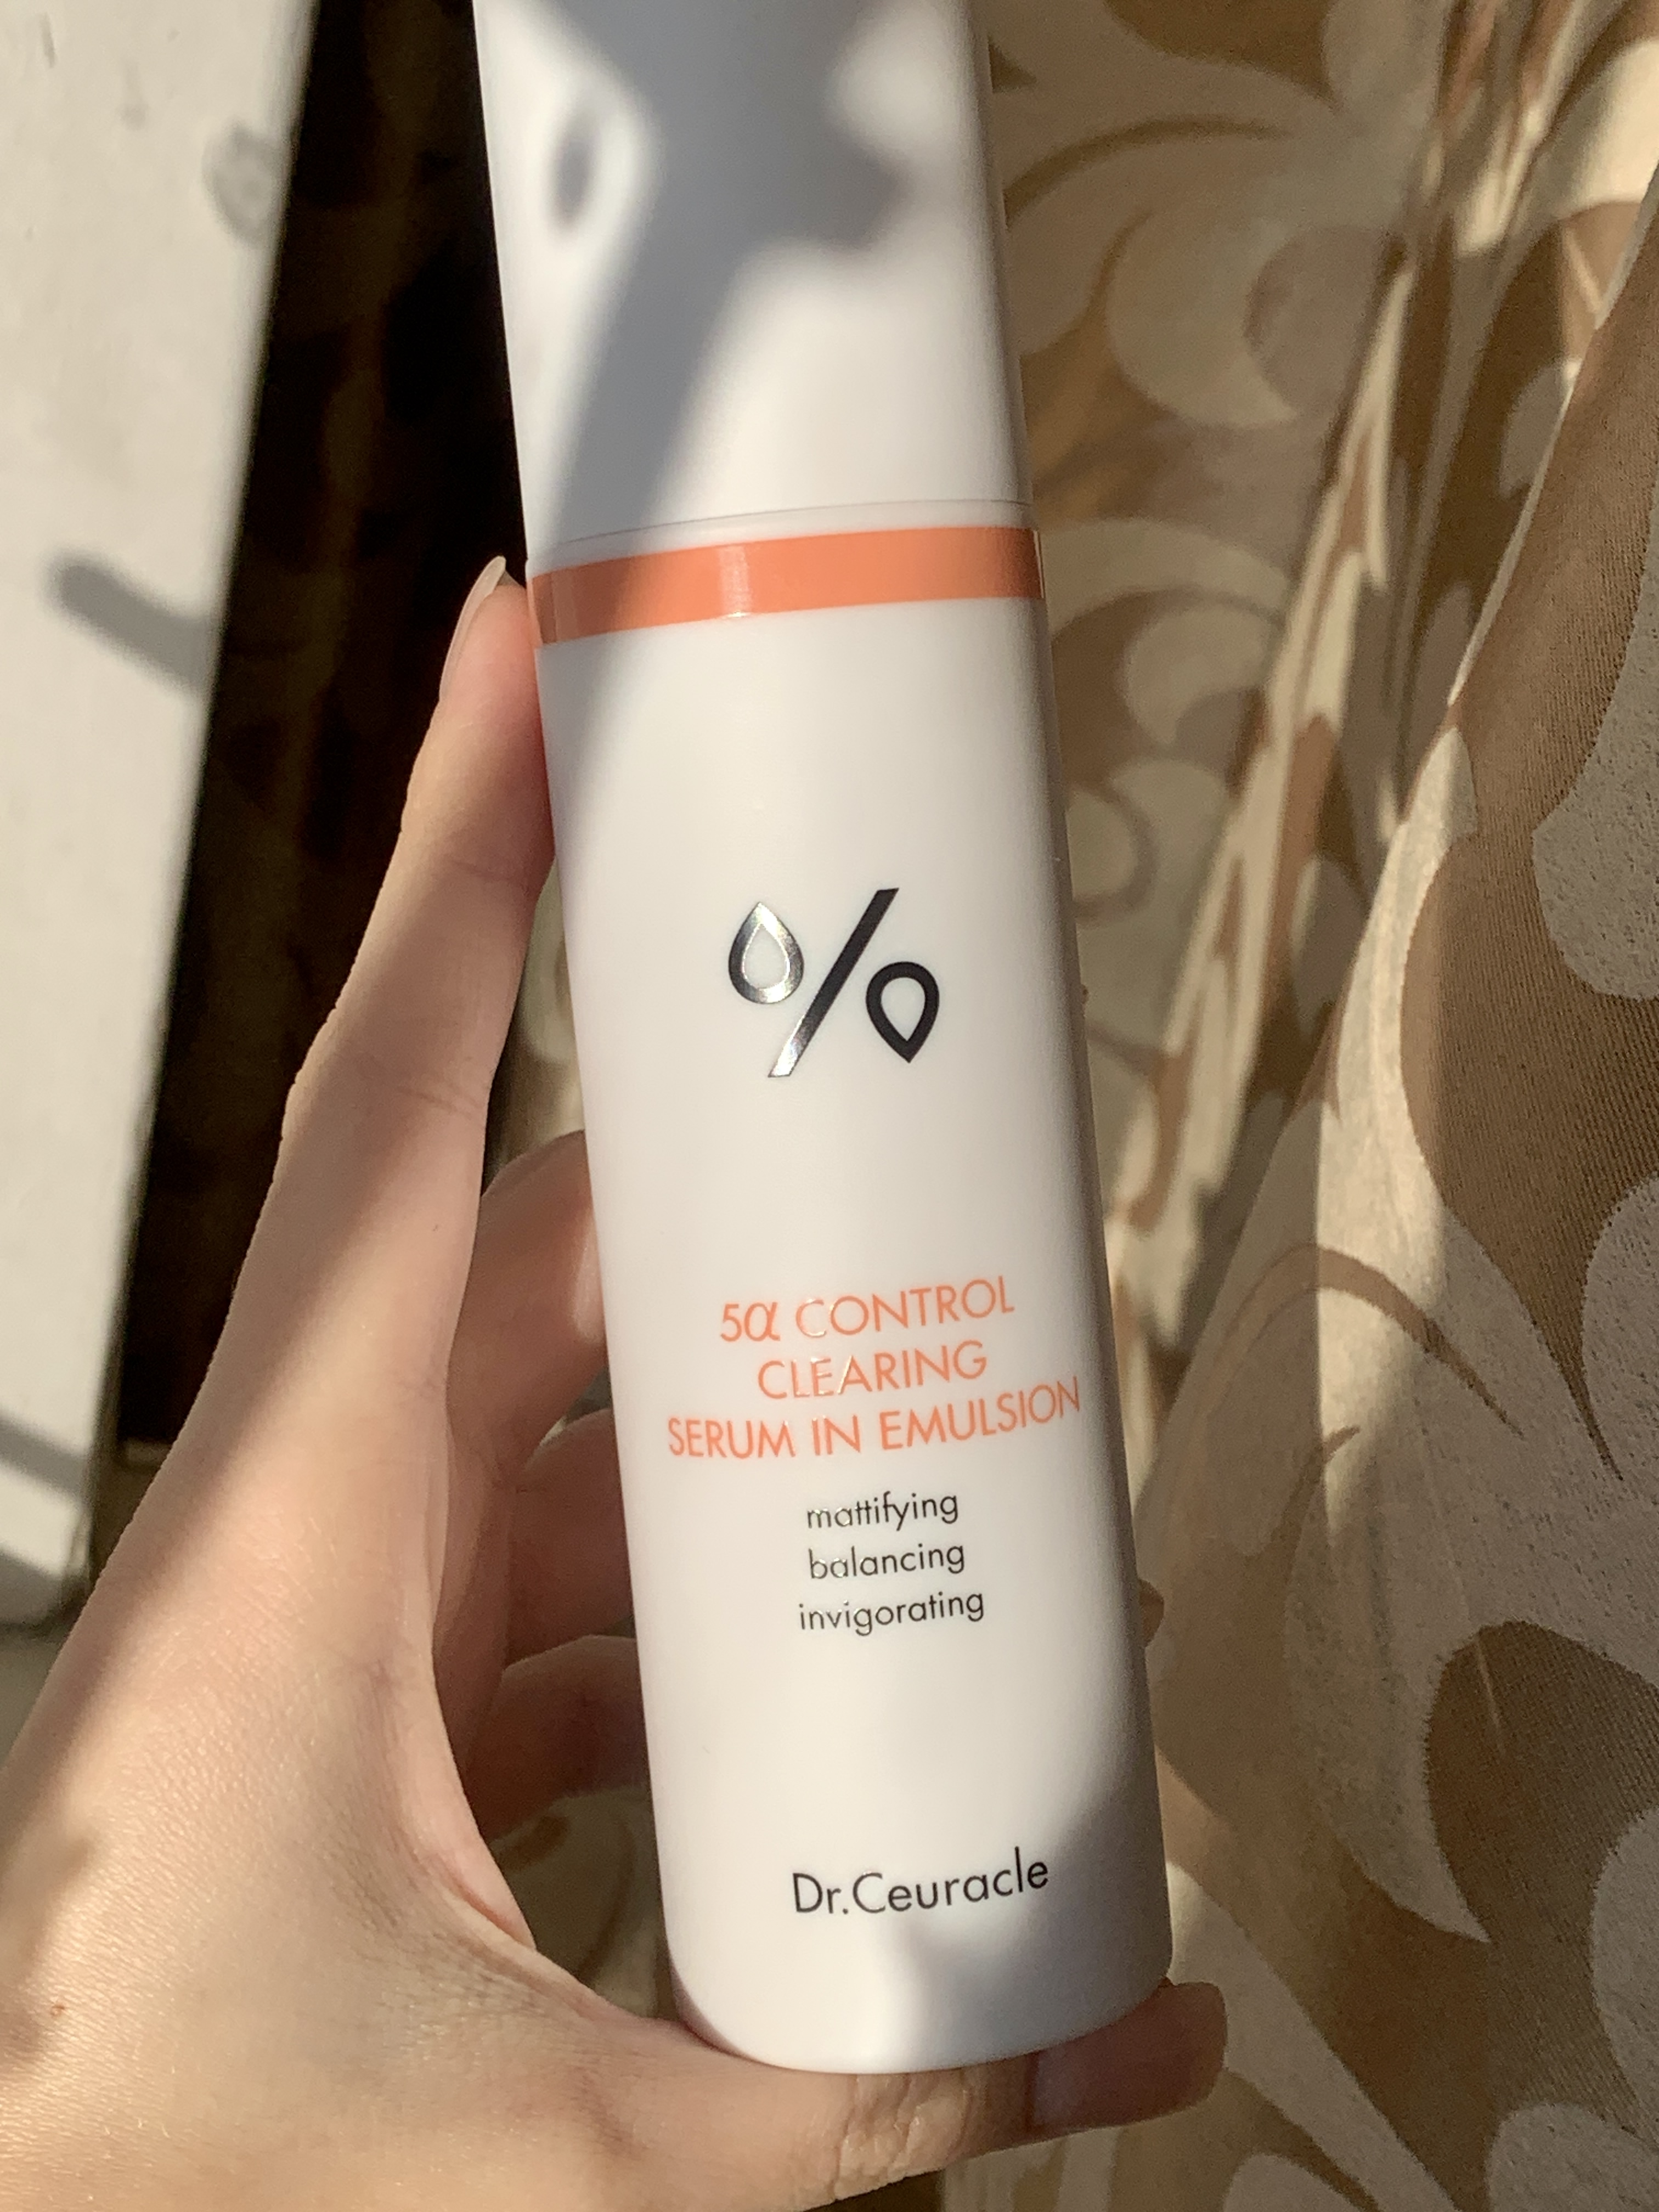 Dr.Ceuracle 5α Control Clearing Serum in Emulsion